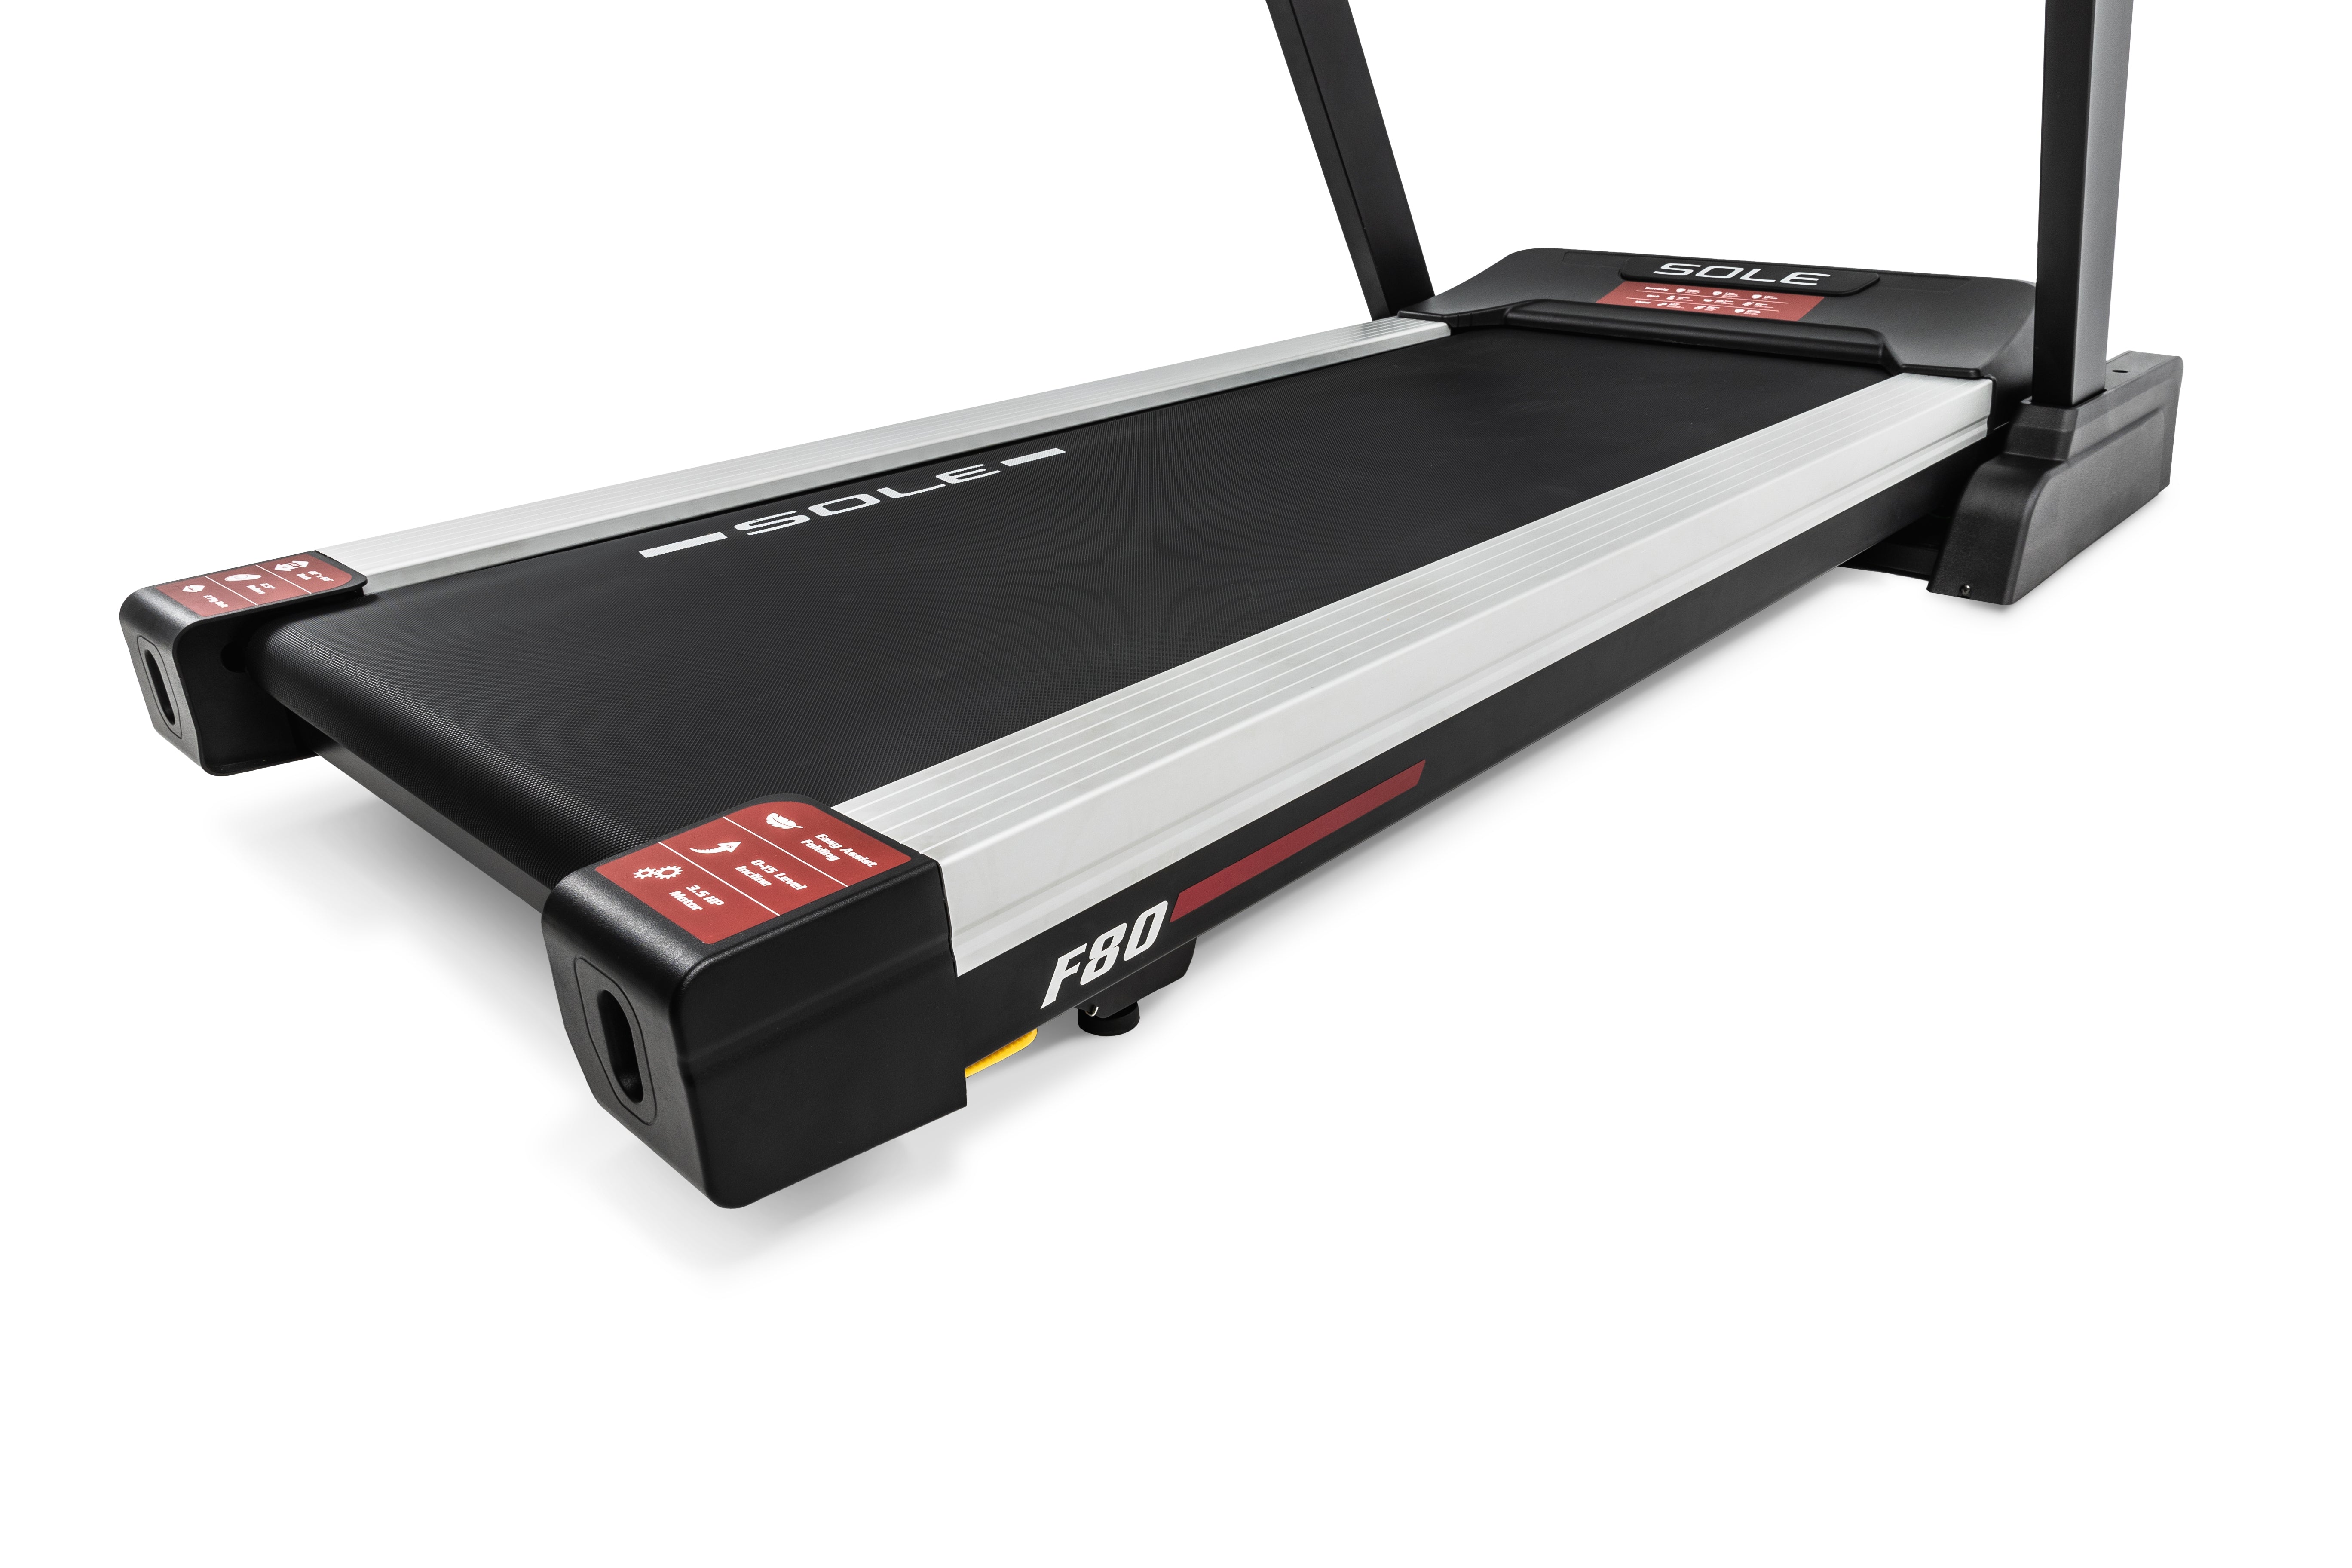 Side view of the Sole F80 treadmill displaying its sleek black design, white side rails, F80 branding, and red warning labels near the front base.